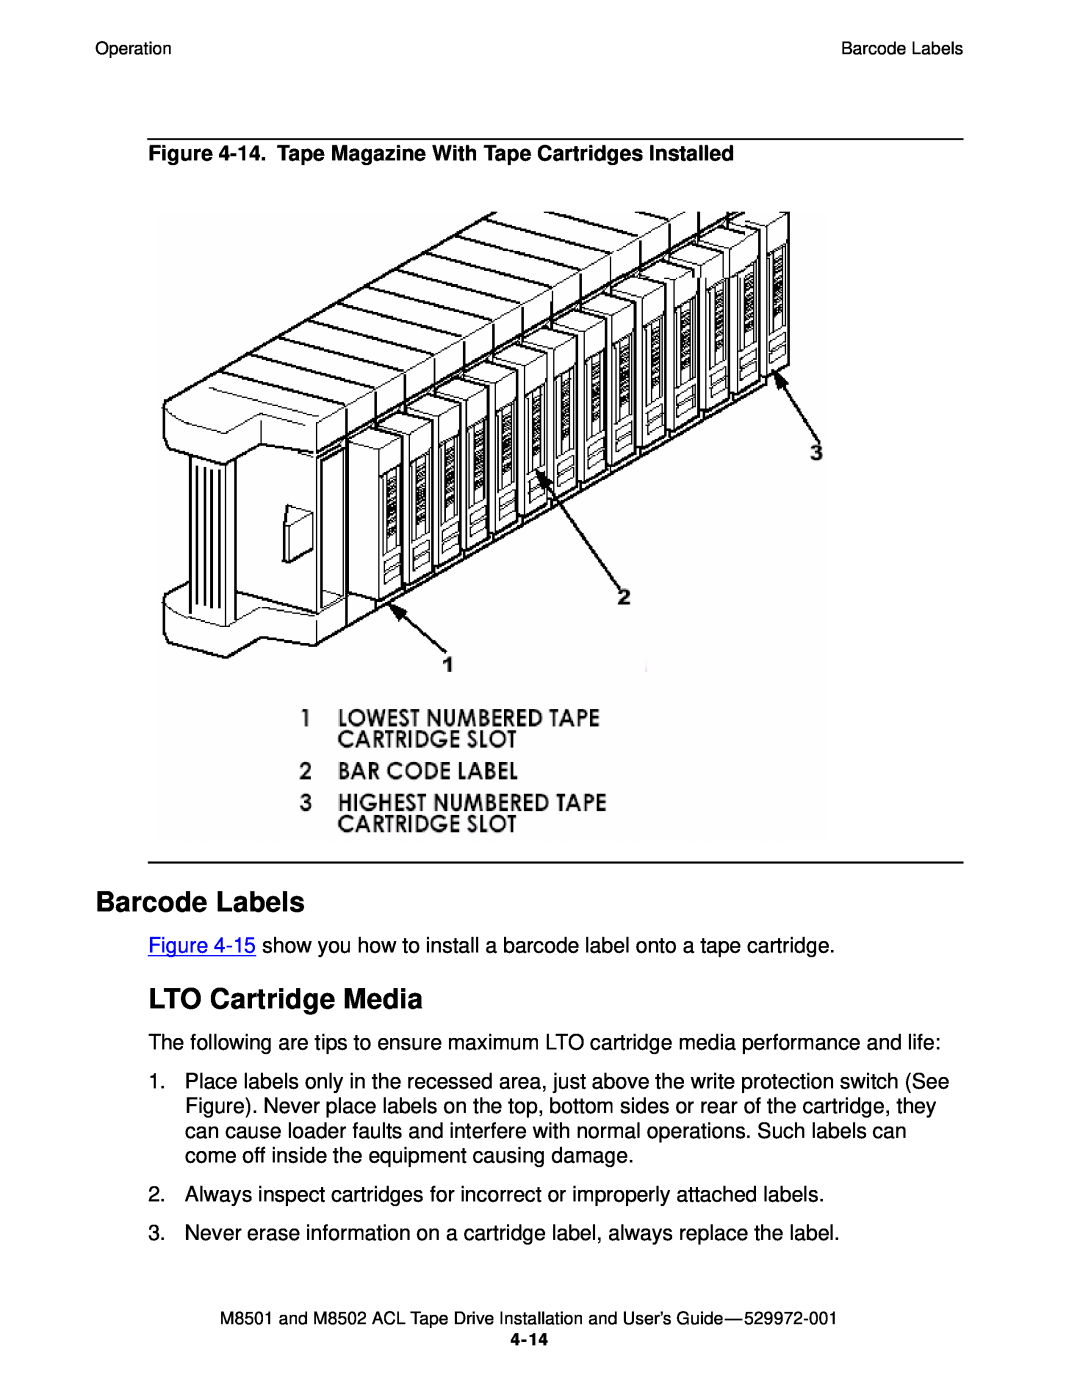 SMC Networks M8501 manual Barcode Labels, LTO Cartridge Media, 14. Tape Magazine With Tape Cartridges Installed 